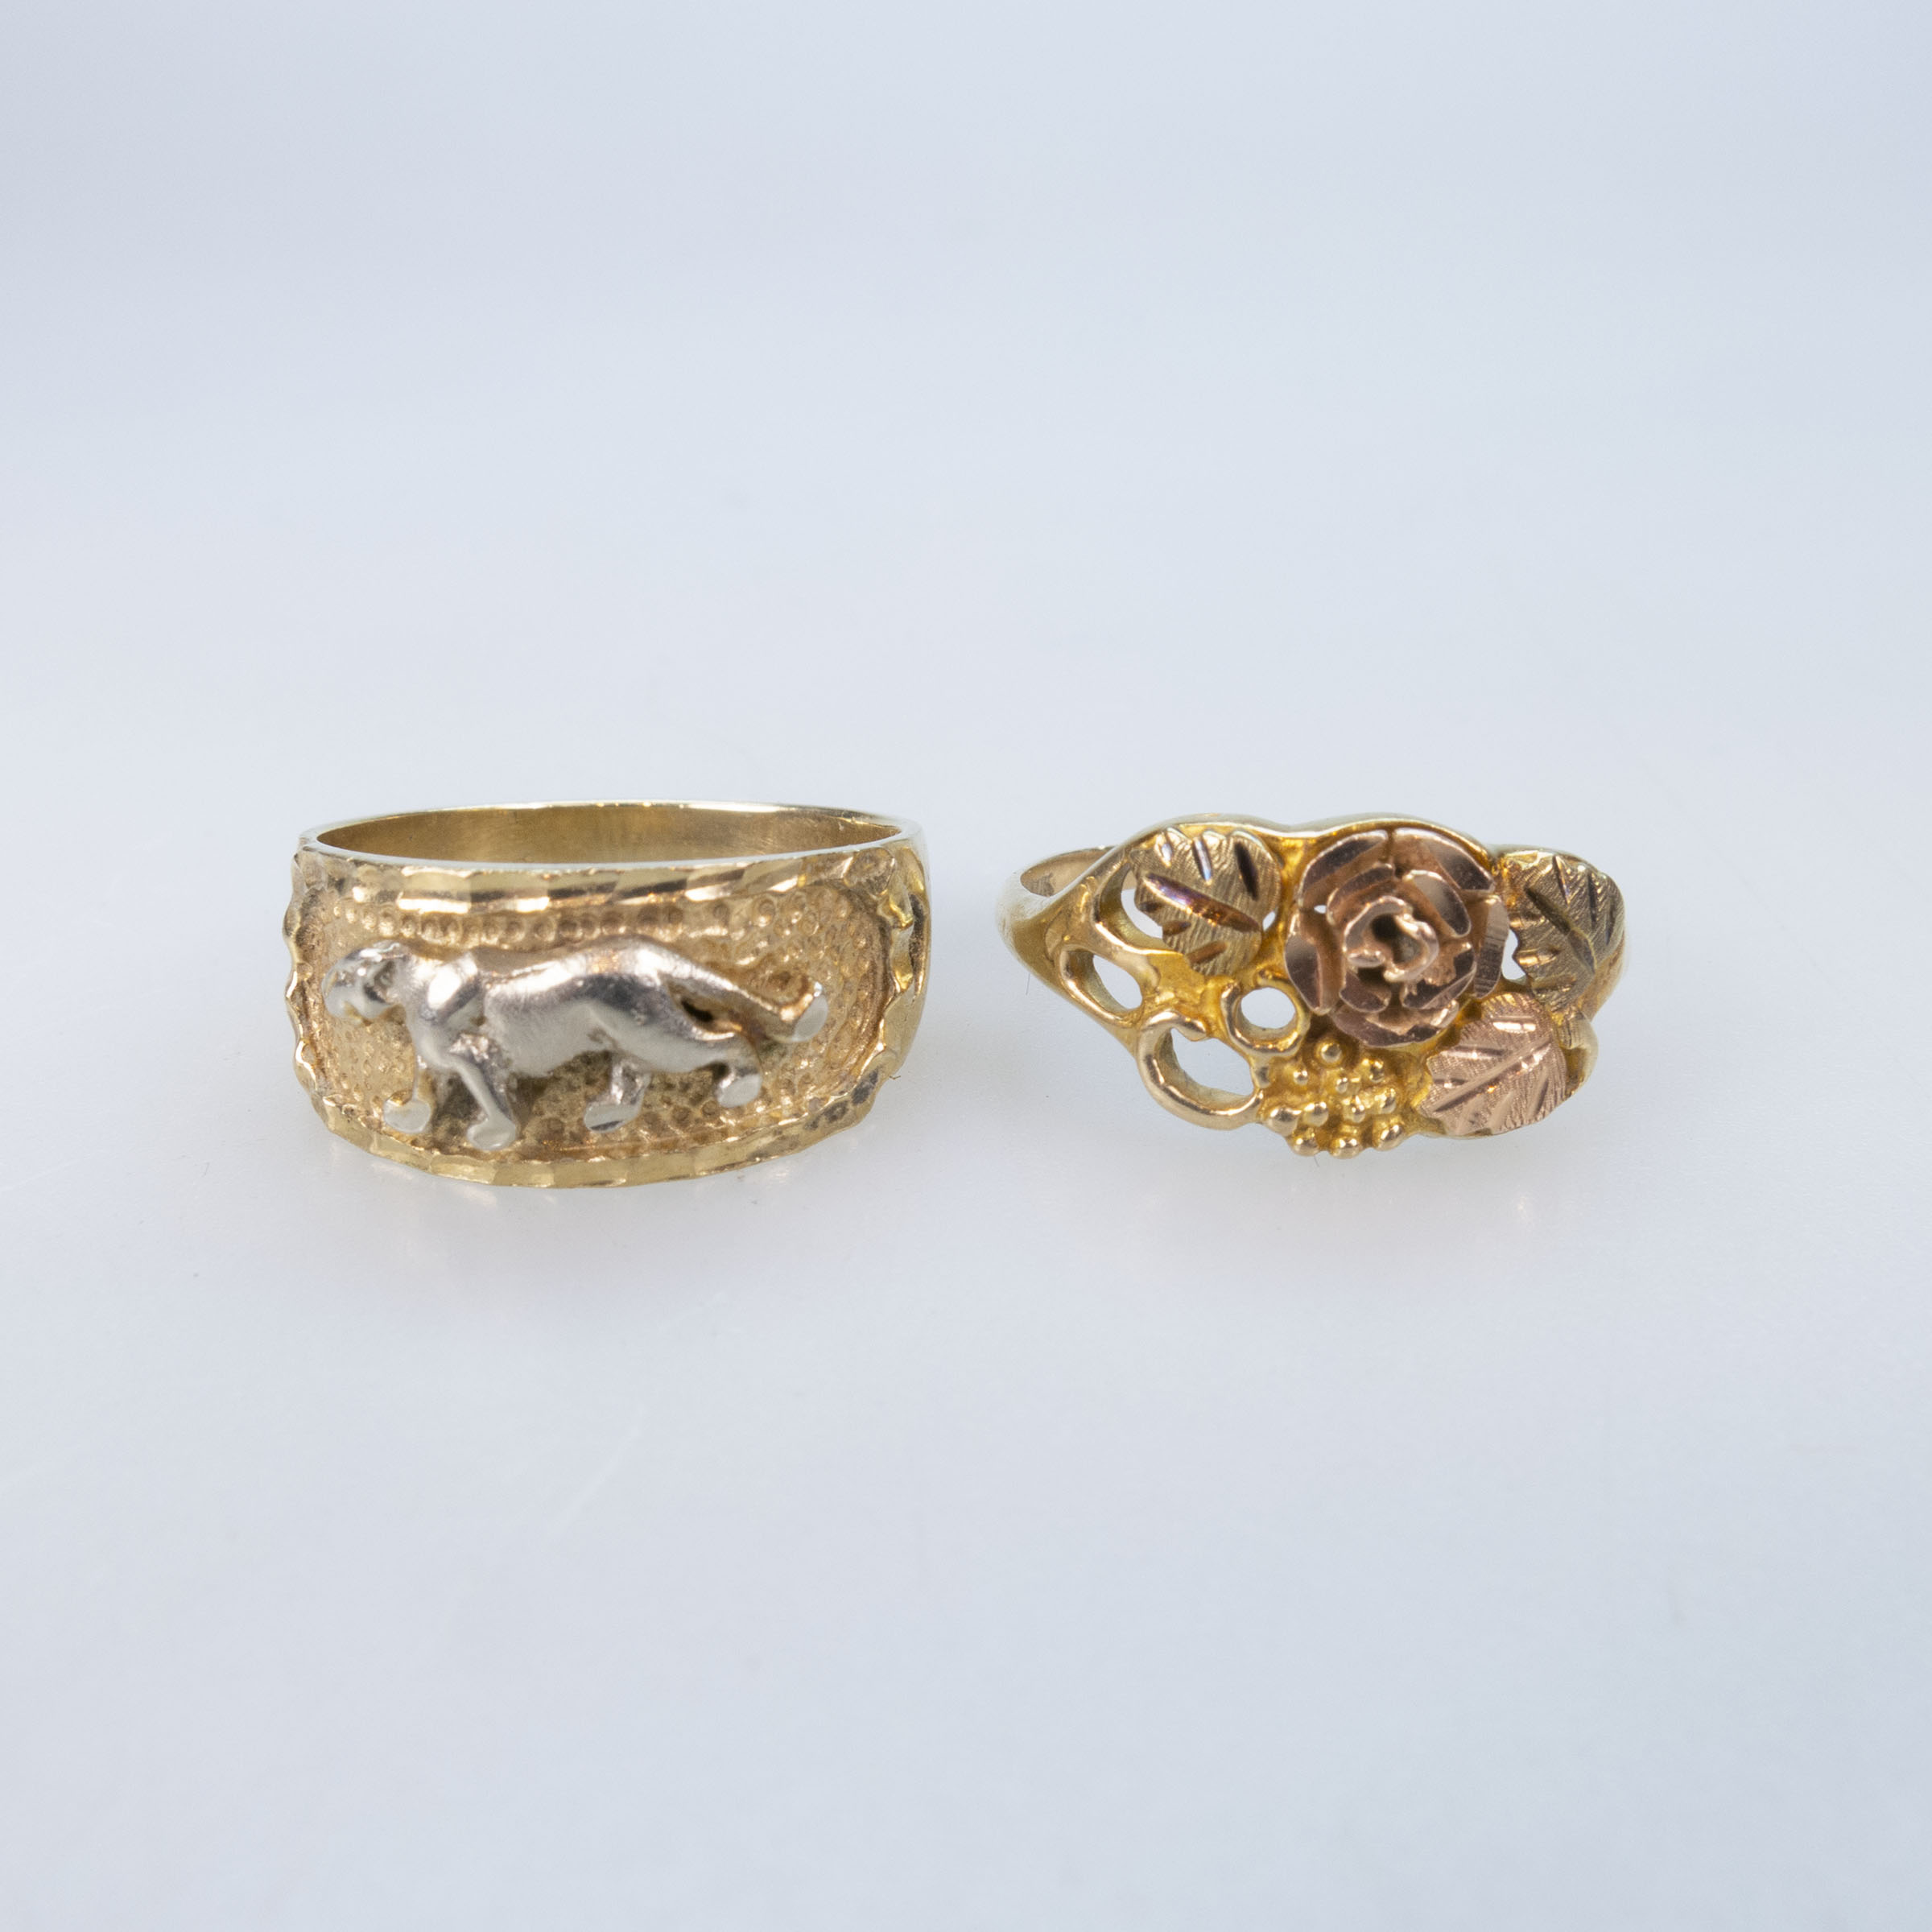 2 x 10k Two Tone Gold Rings